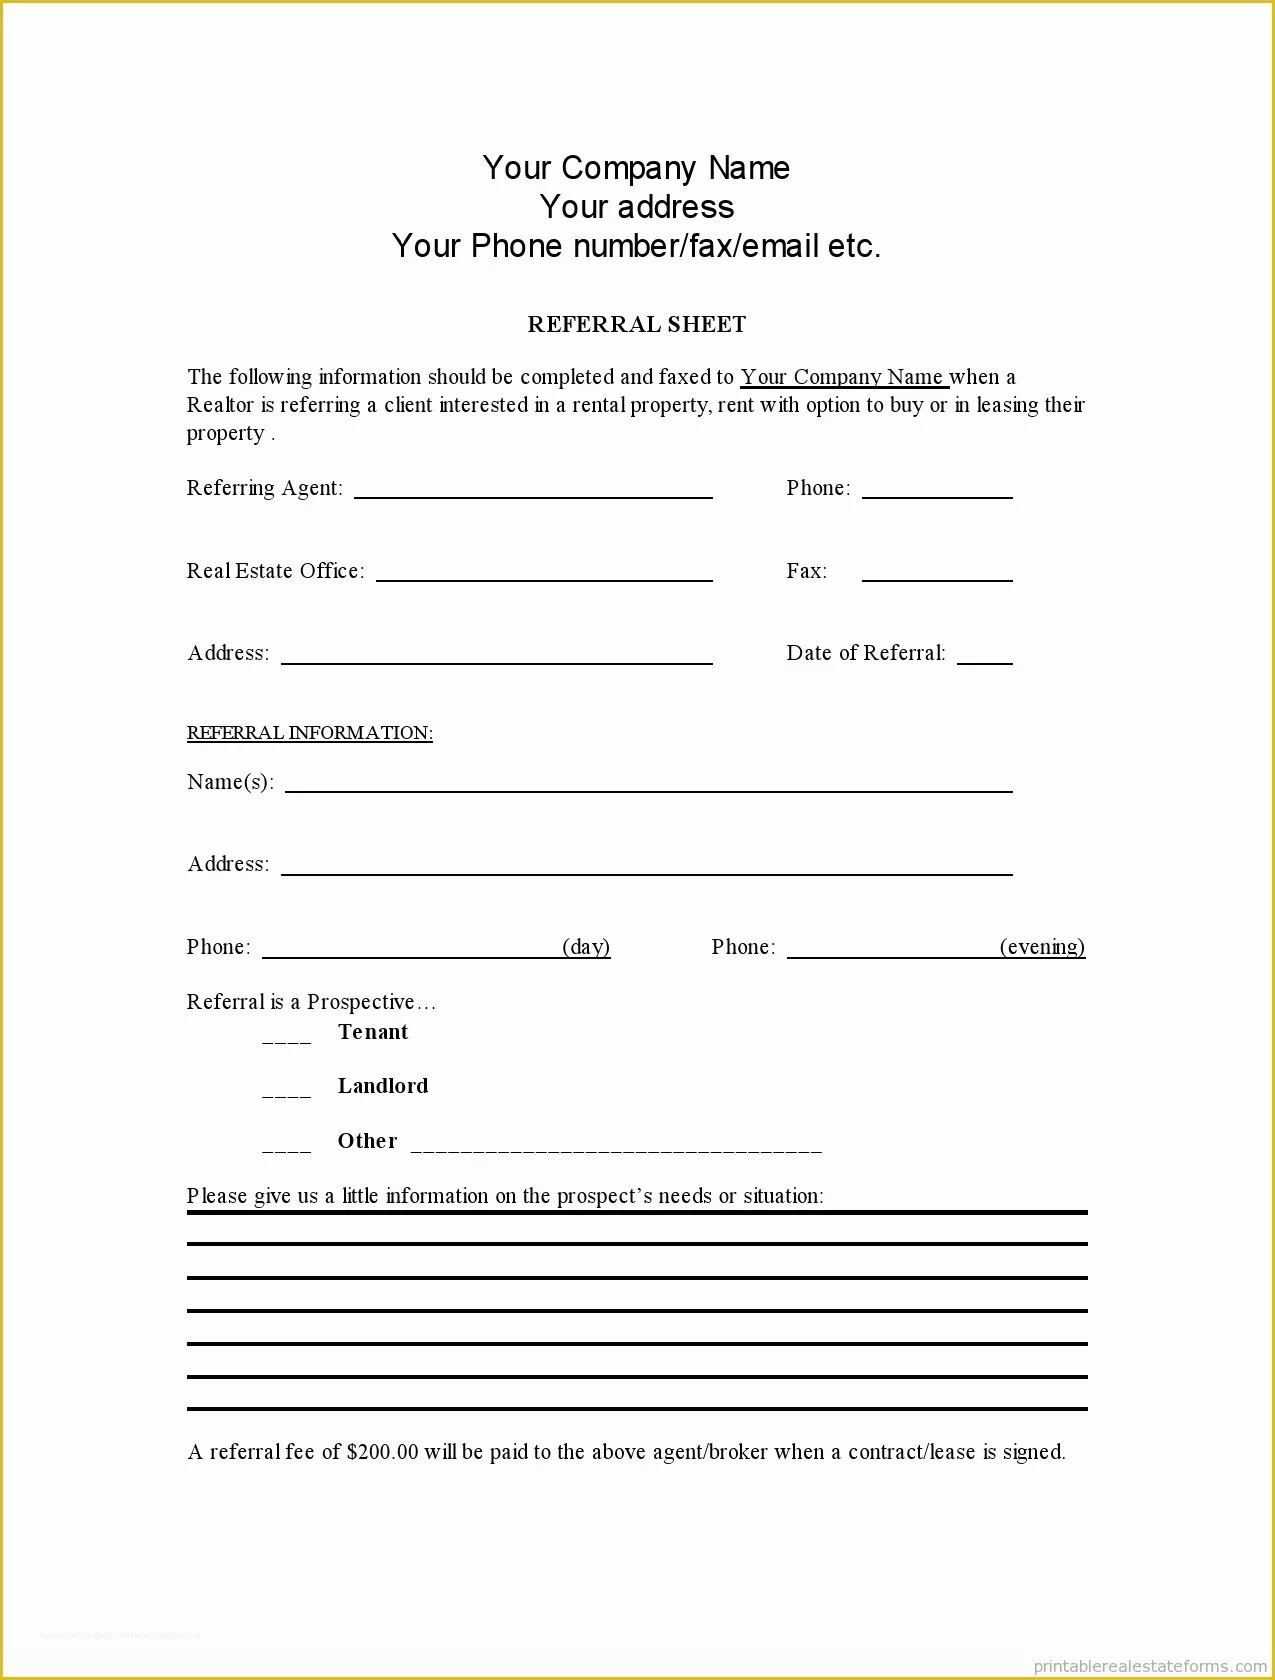 Free Referral form Template Of Free Printable Real Estate Referral form Template Pdf